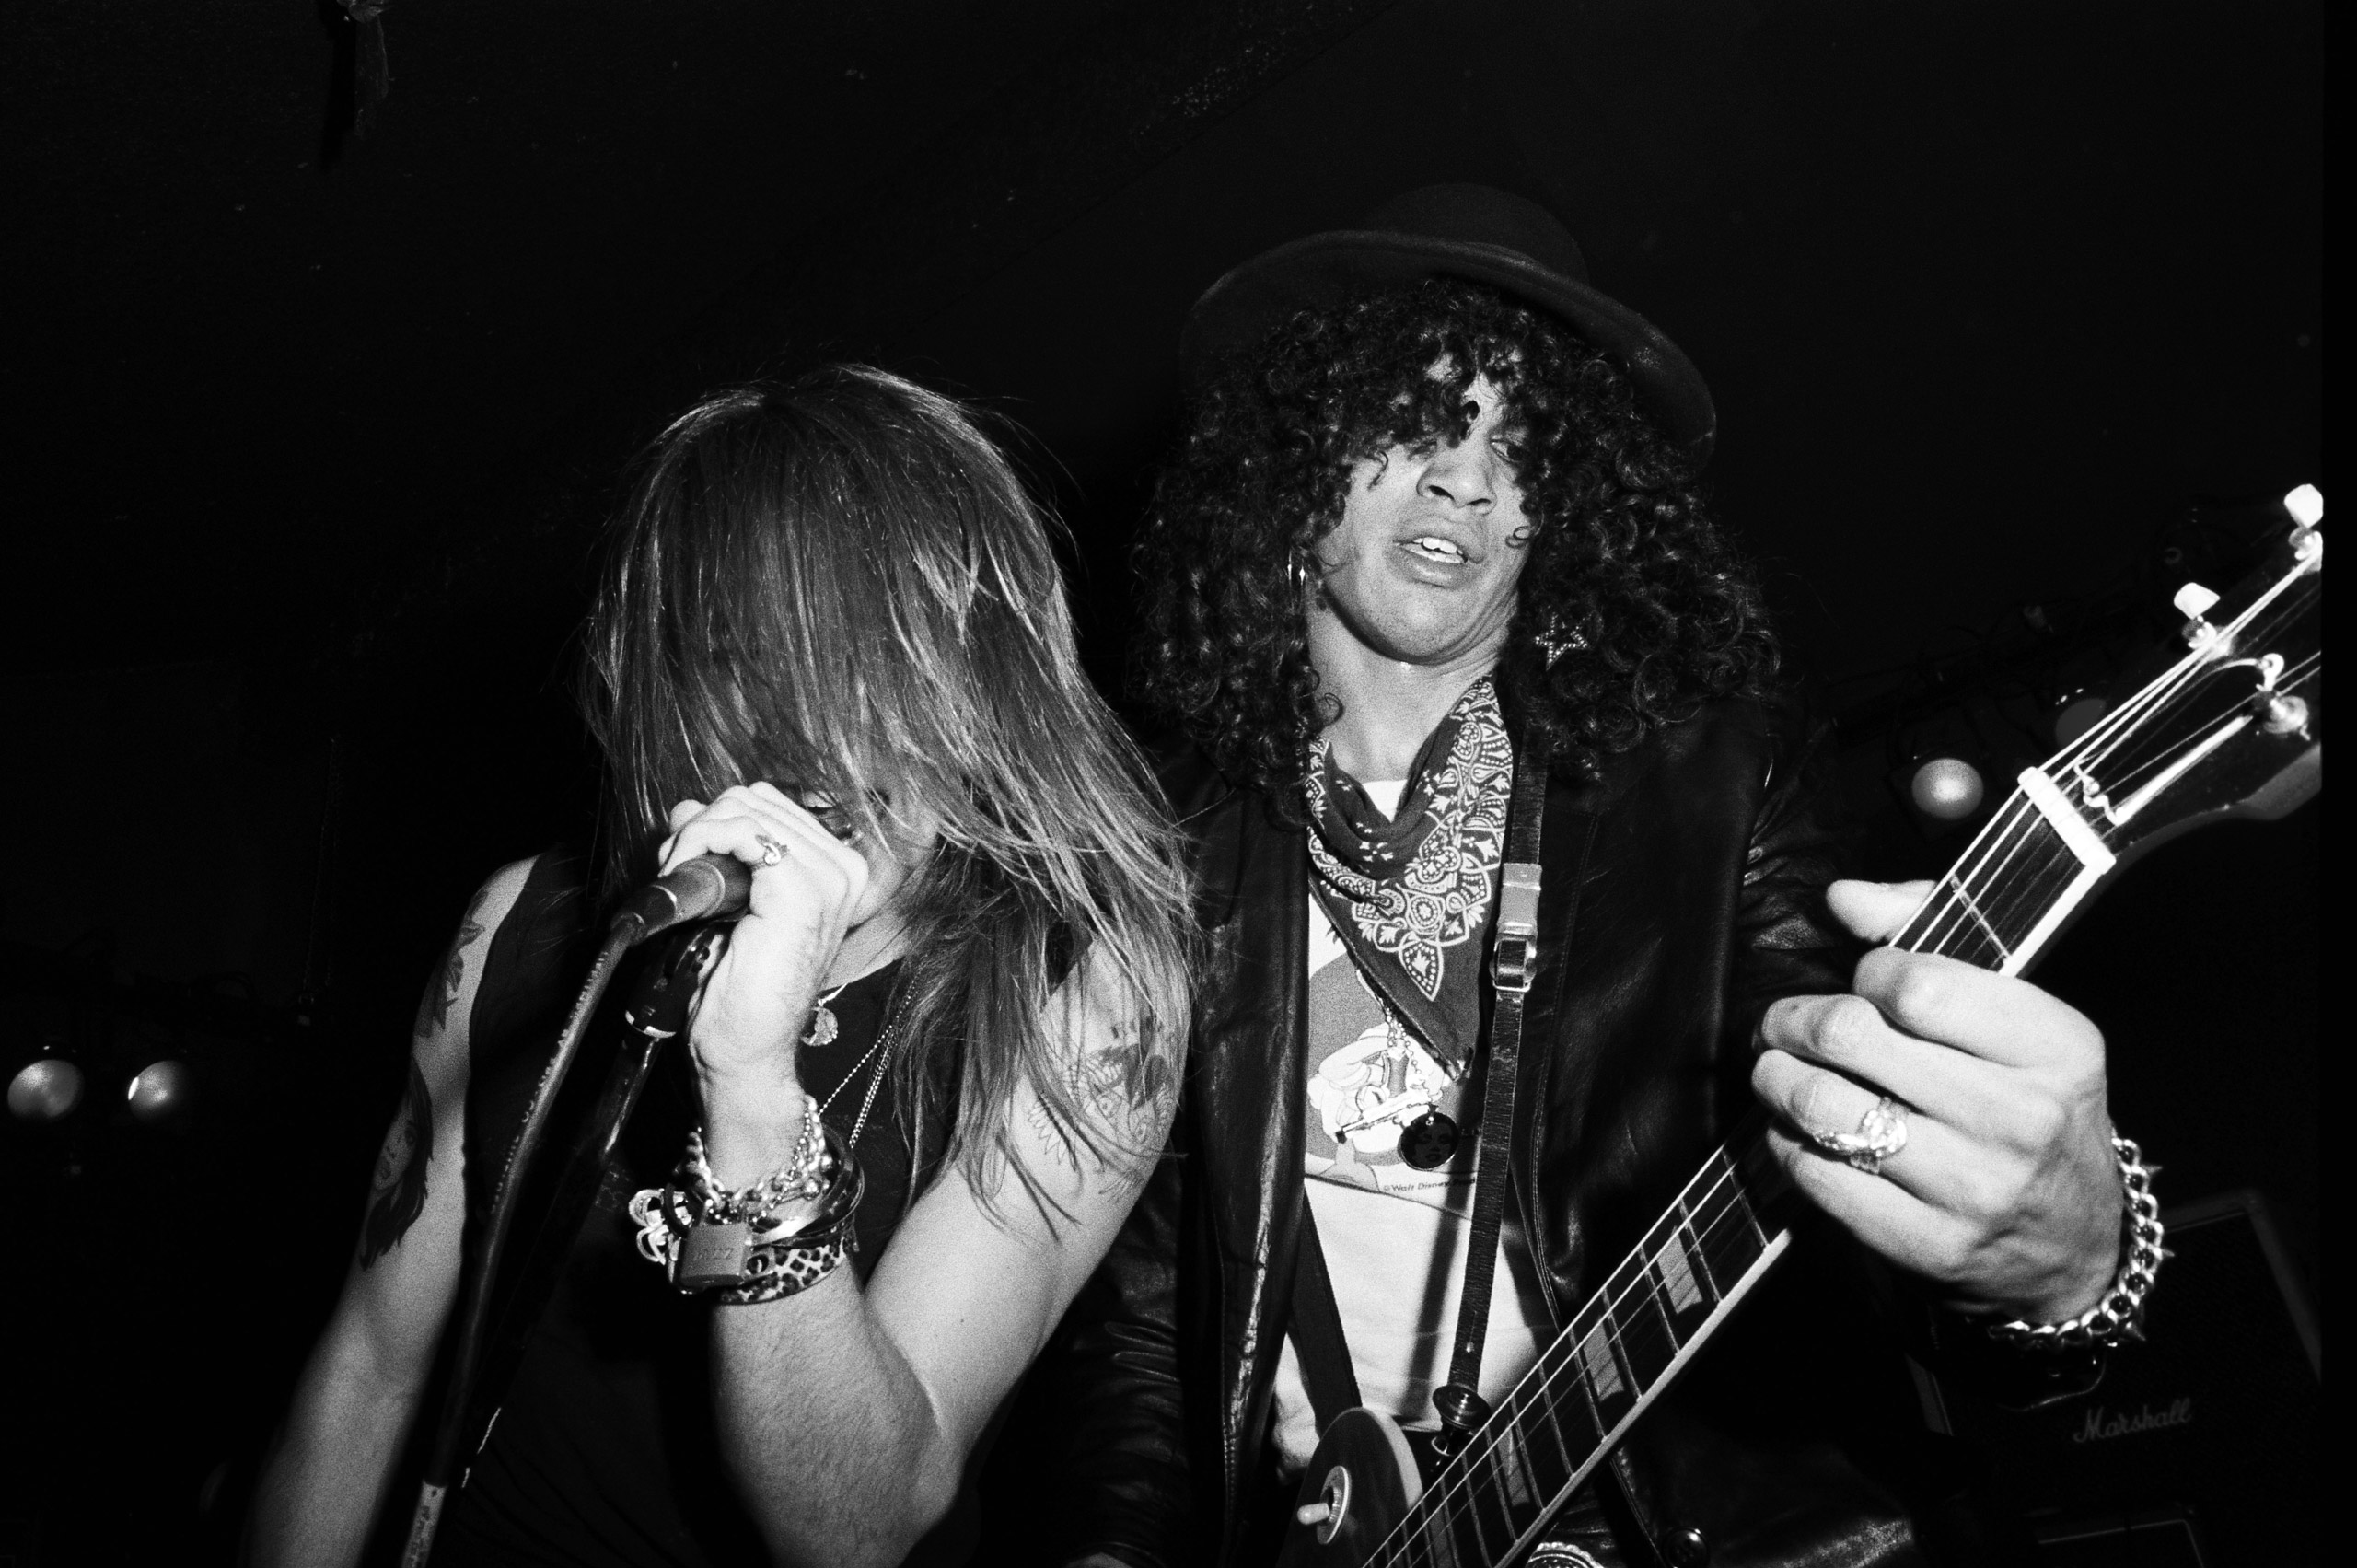 Axl Rose and Slash of the Guns n' Roses perform at Radio City on Oct. 31, 1985  in Anaheim, Calif.